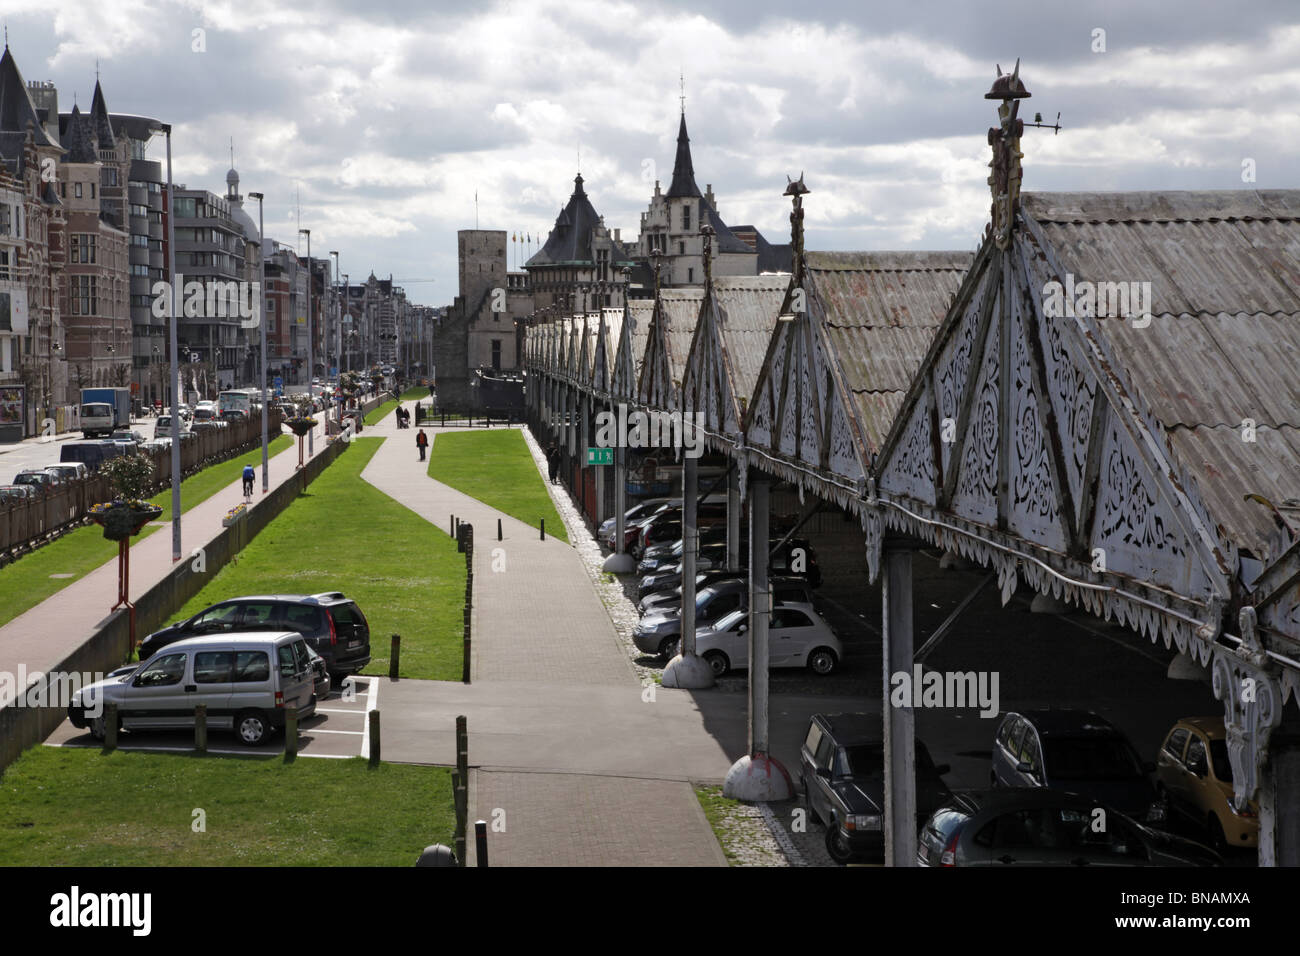 View on old fashioned parking spaces in Antwerp Stock Photo